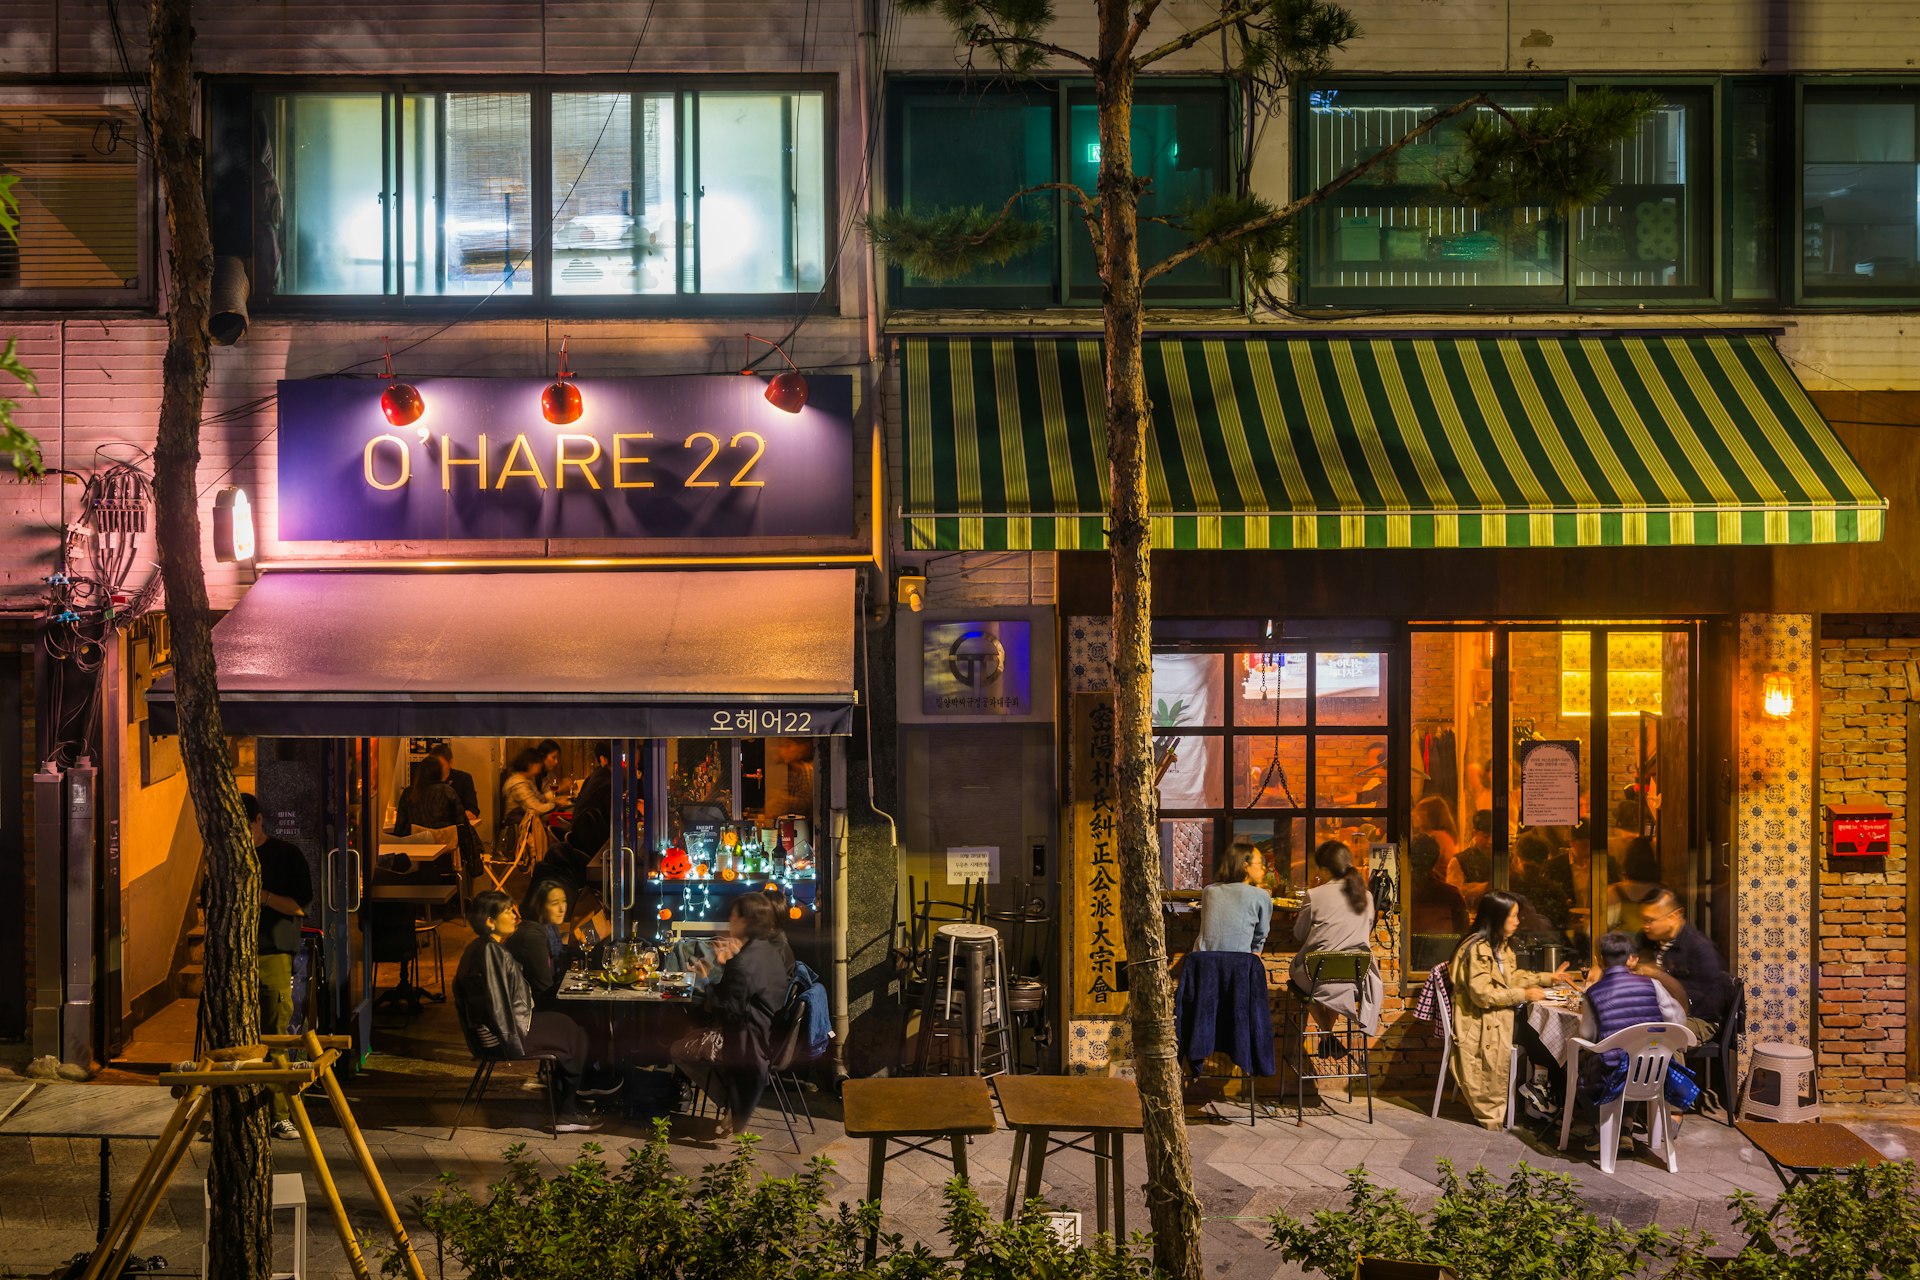 A street view of people inside and outside bars drinking at night in Seoul